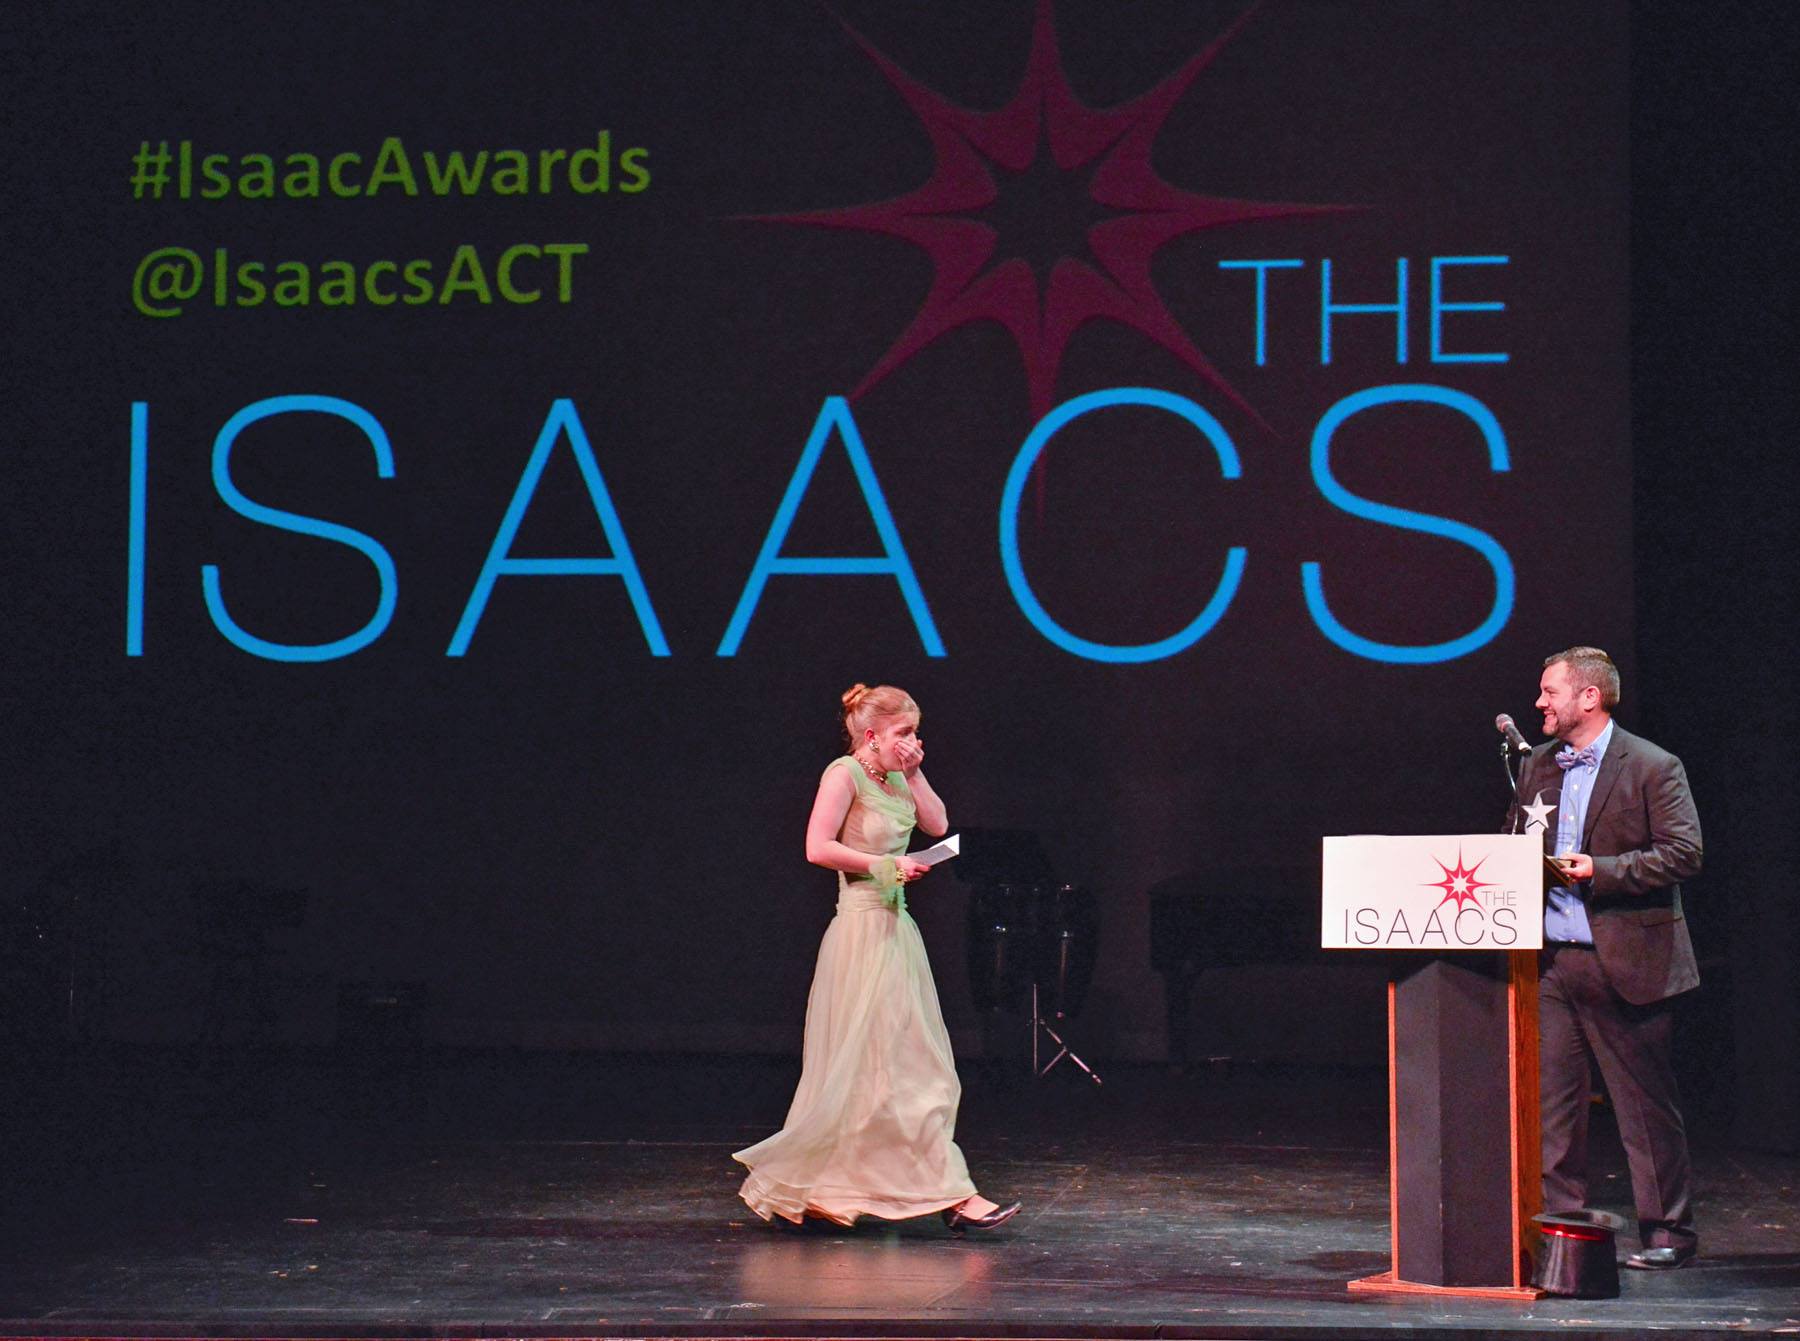 A young female accepts an Isaac Award on stage